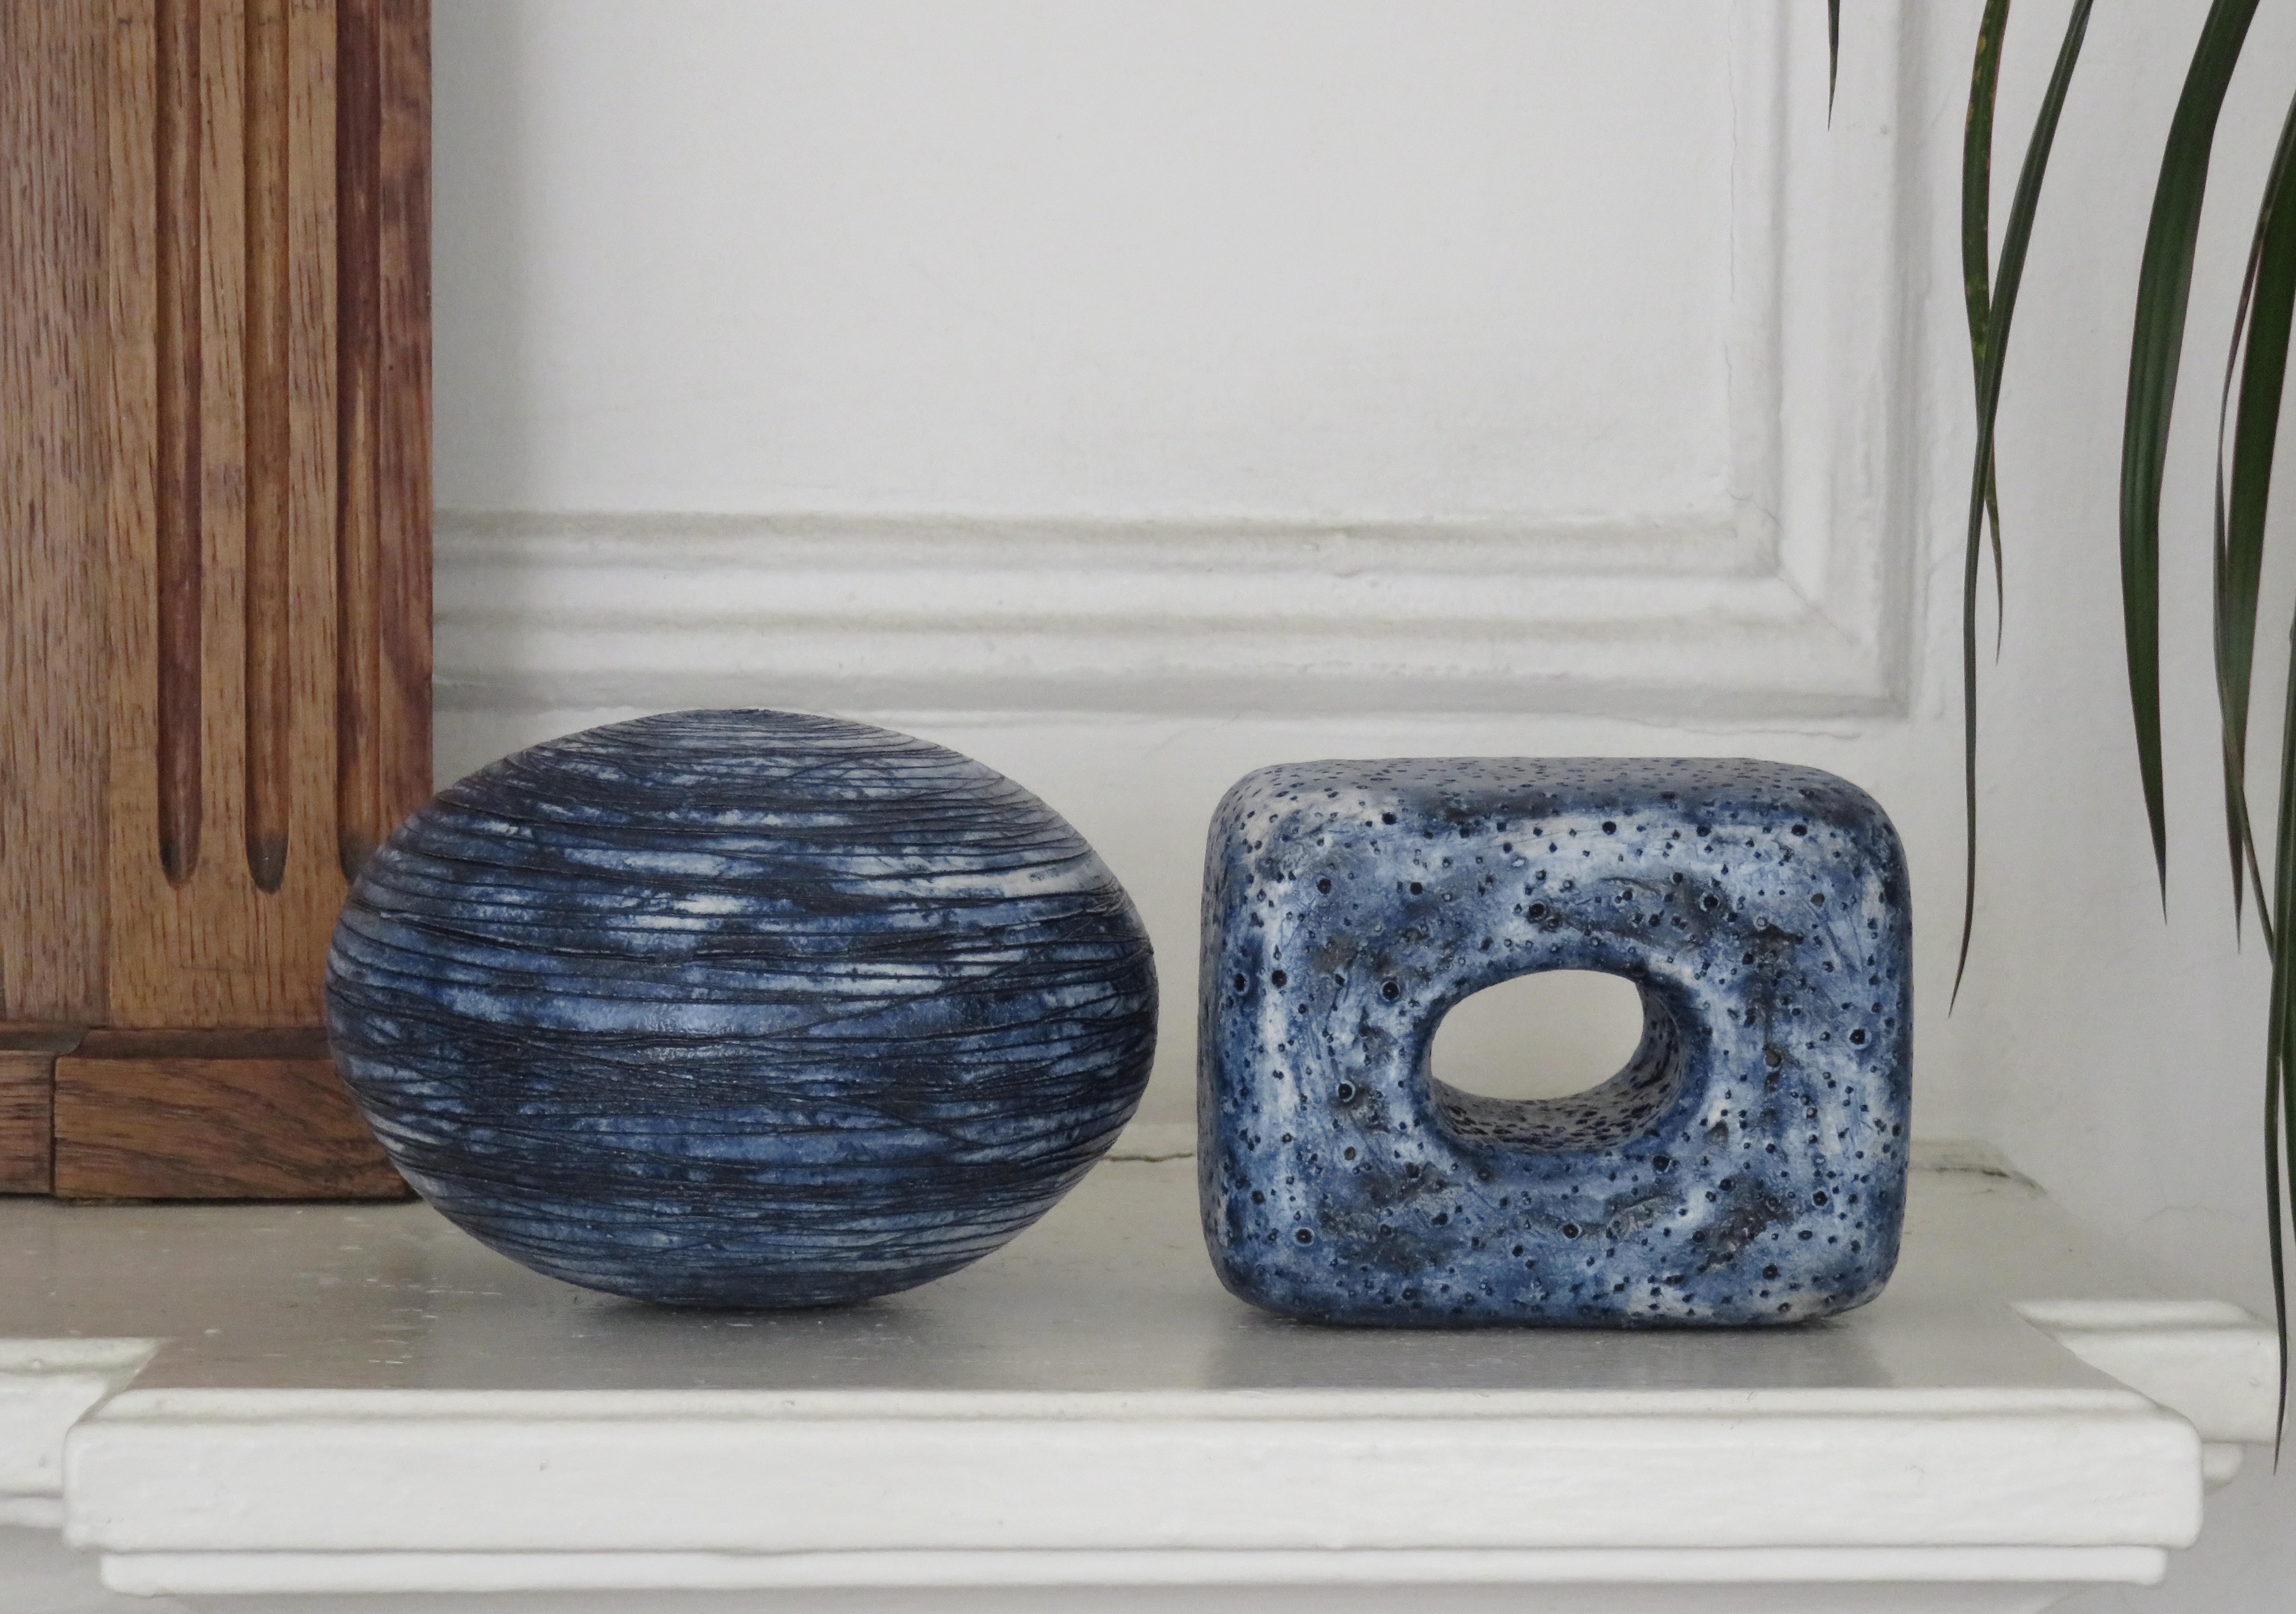 Hand Textured Ceramic Sculpture, Oblong Cube with Oval Opening in Deep Blue Wash 10